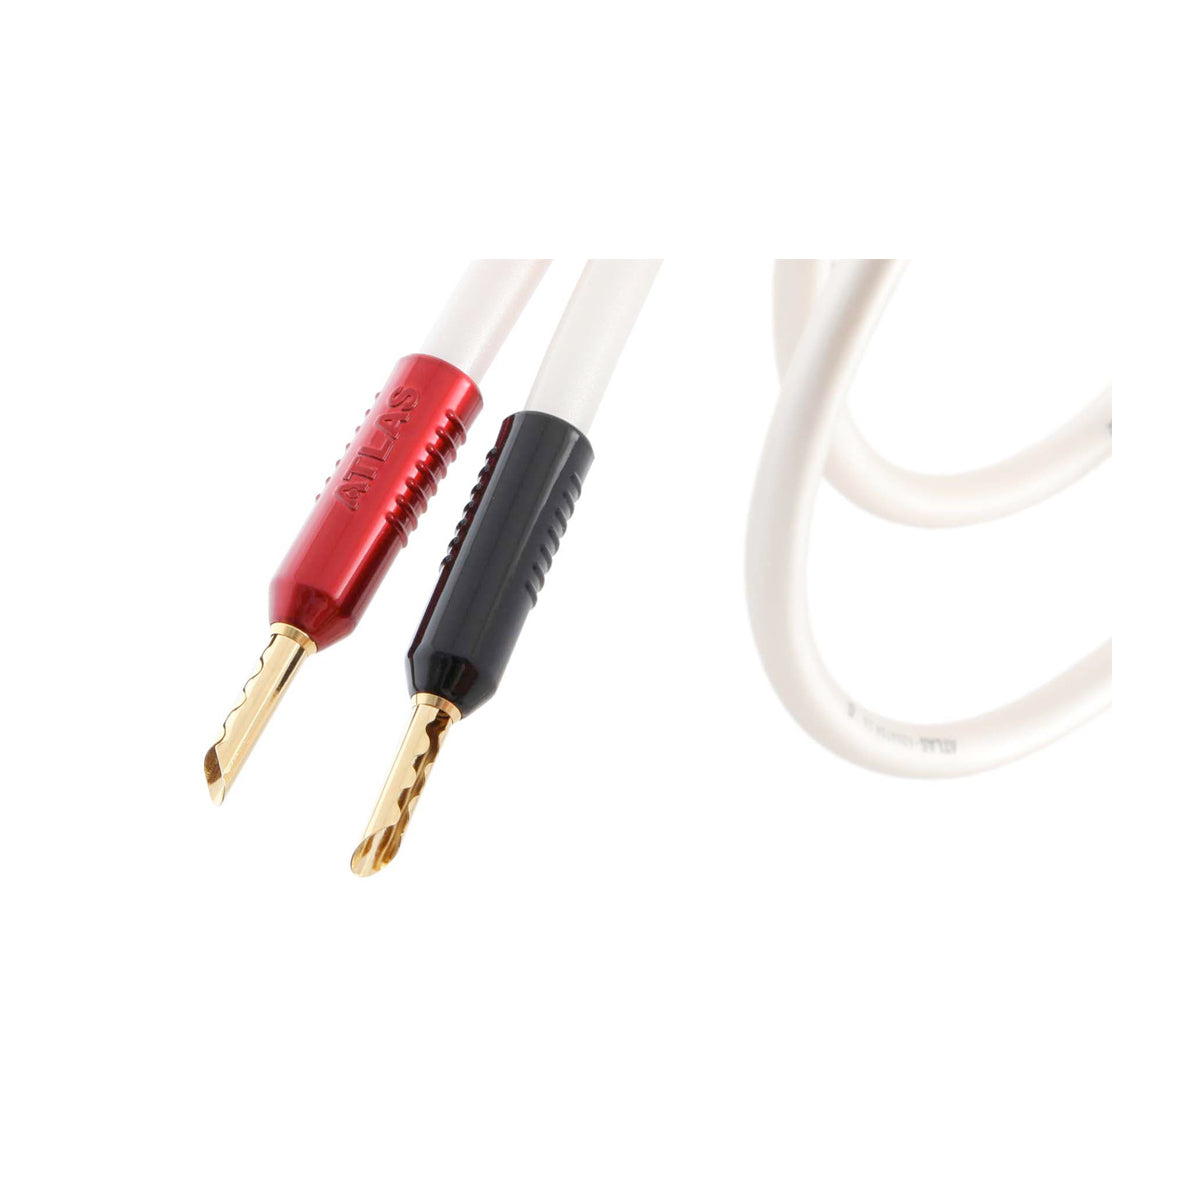 Atlas Element Achromatic Z 2.0 Speaker Cable - The Audio Experts